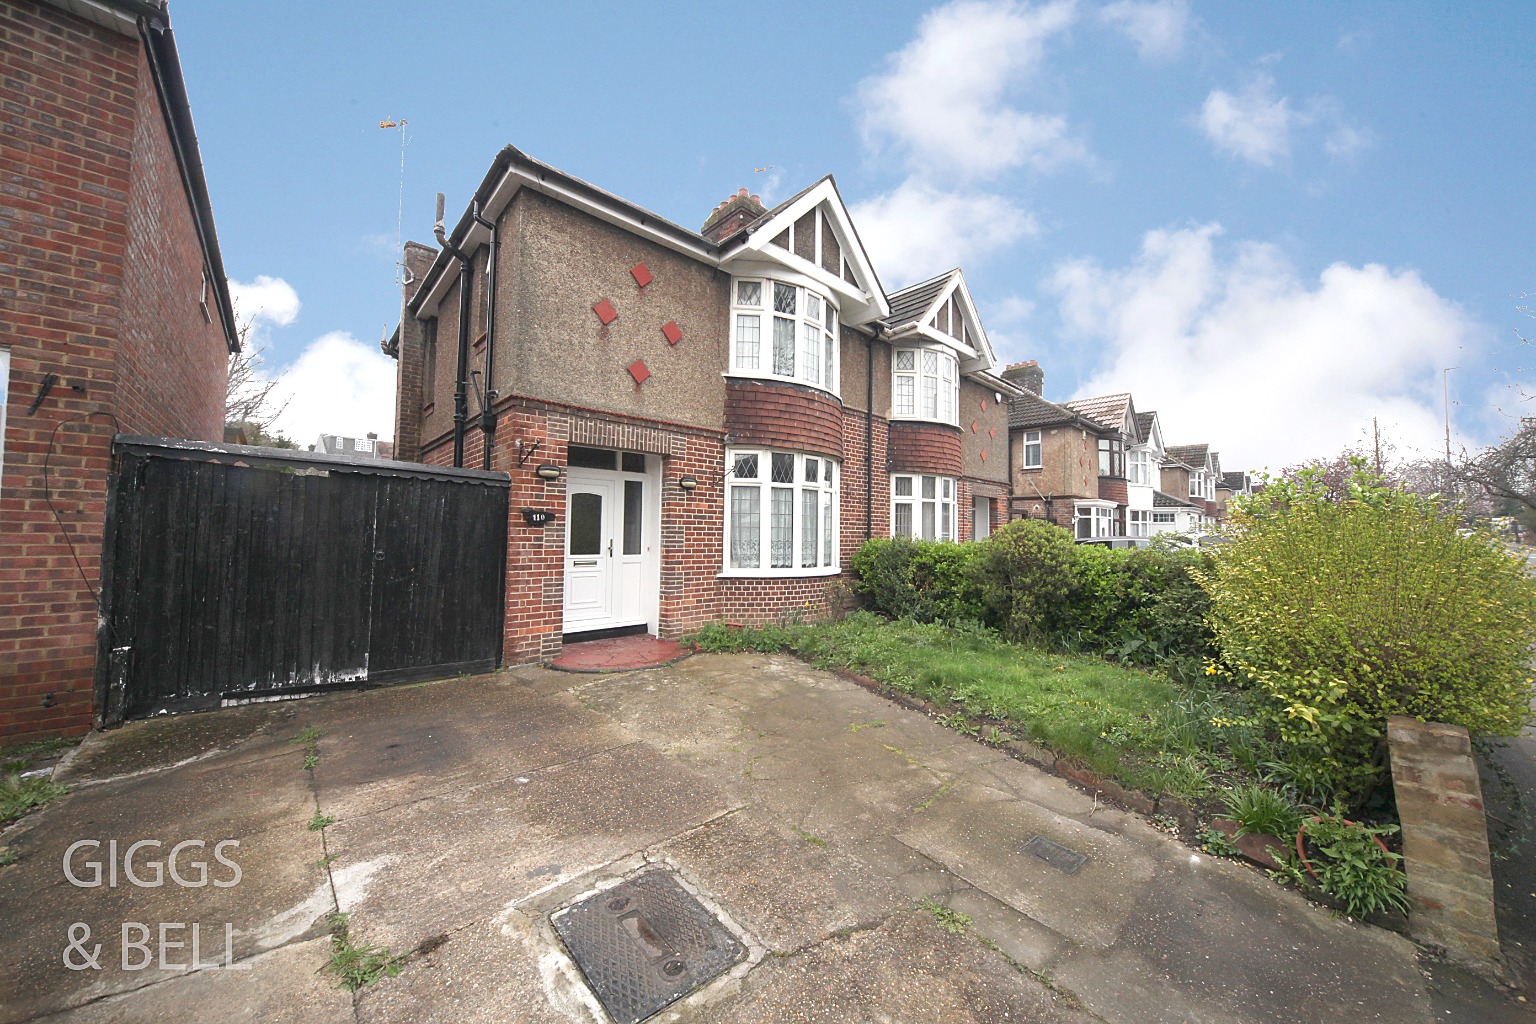 3 bed semi-detached house for sale in Oakley Road, Luton - Property Image 1